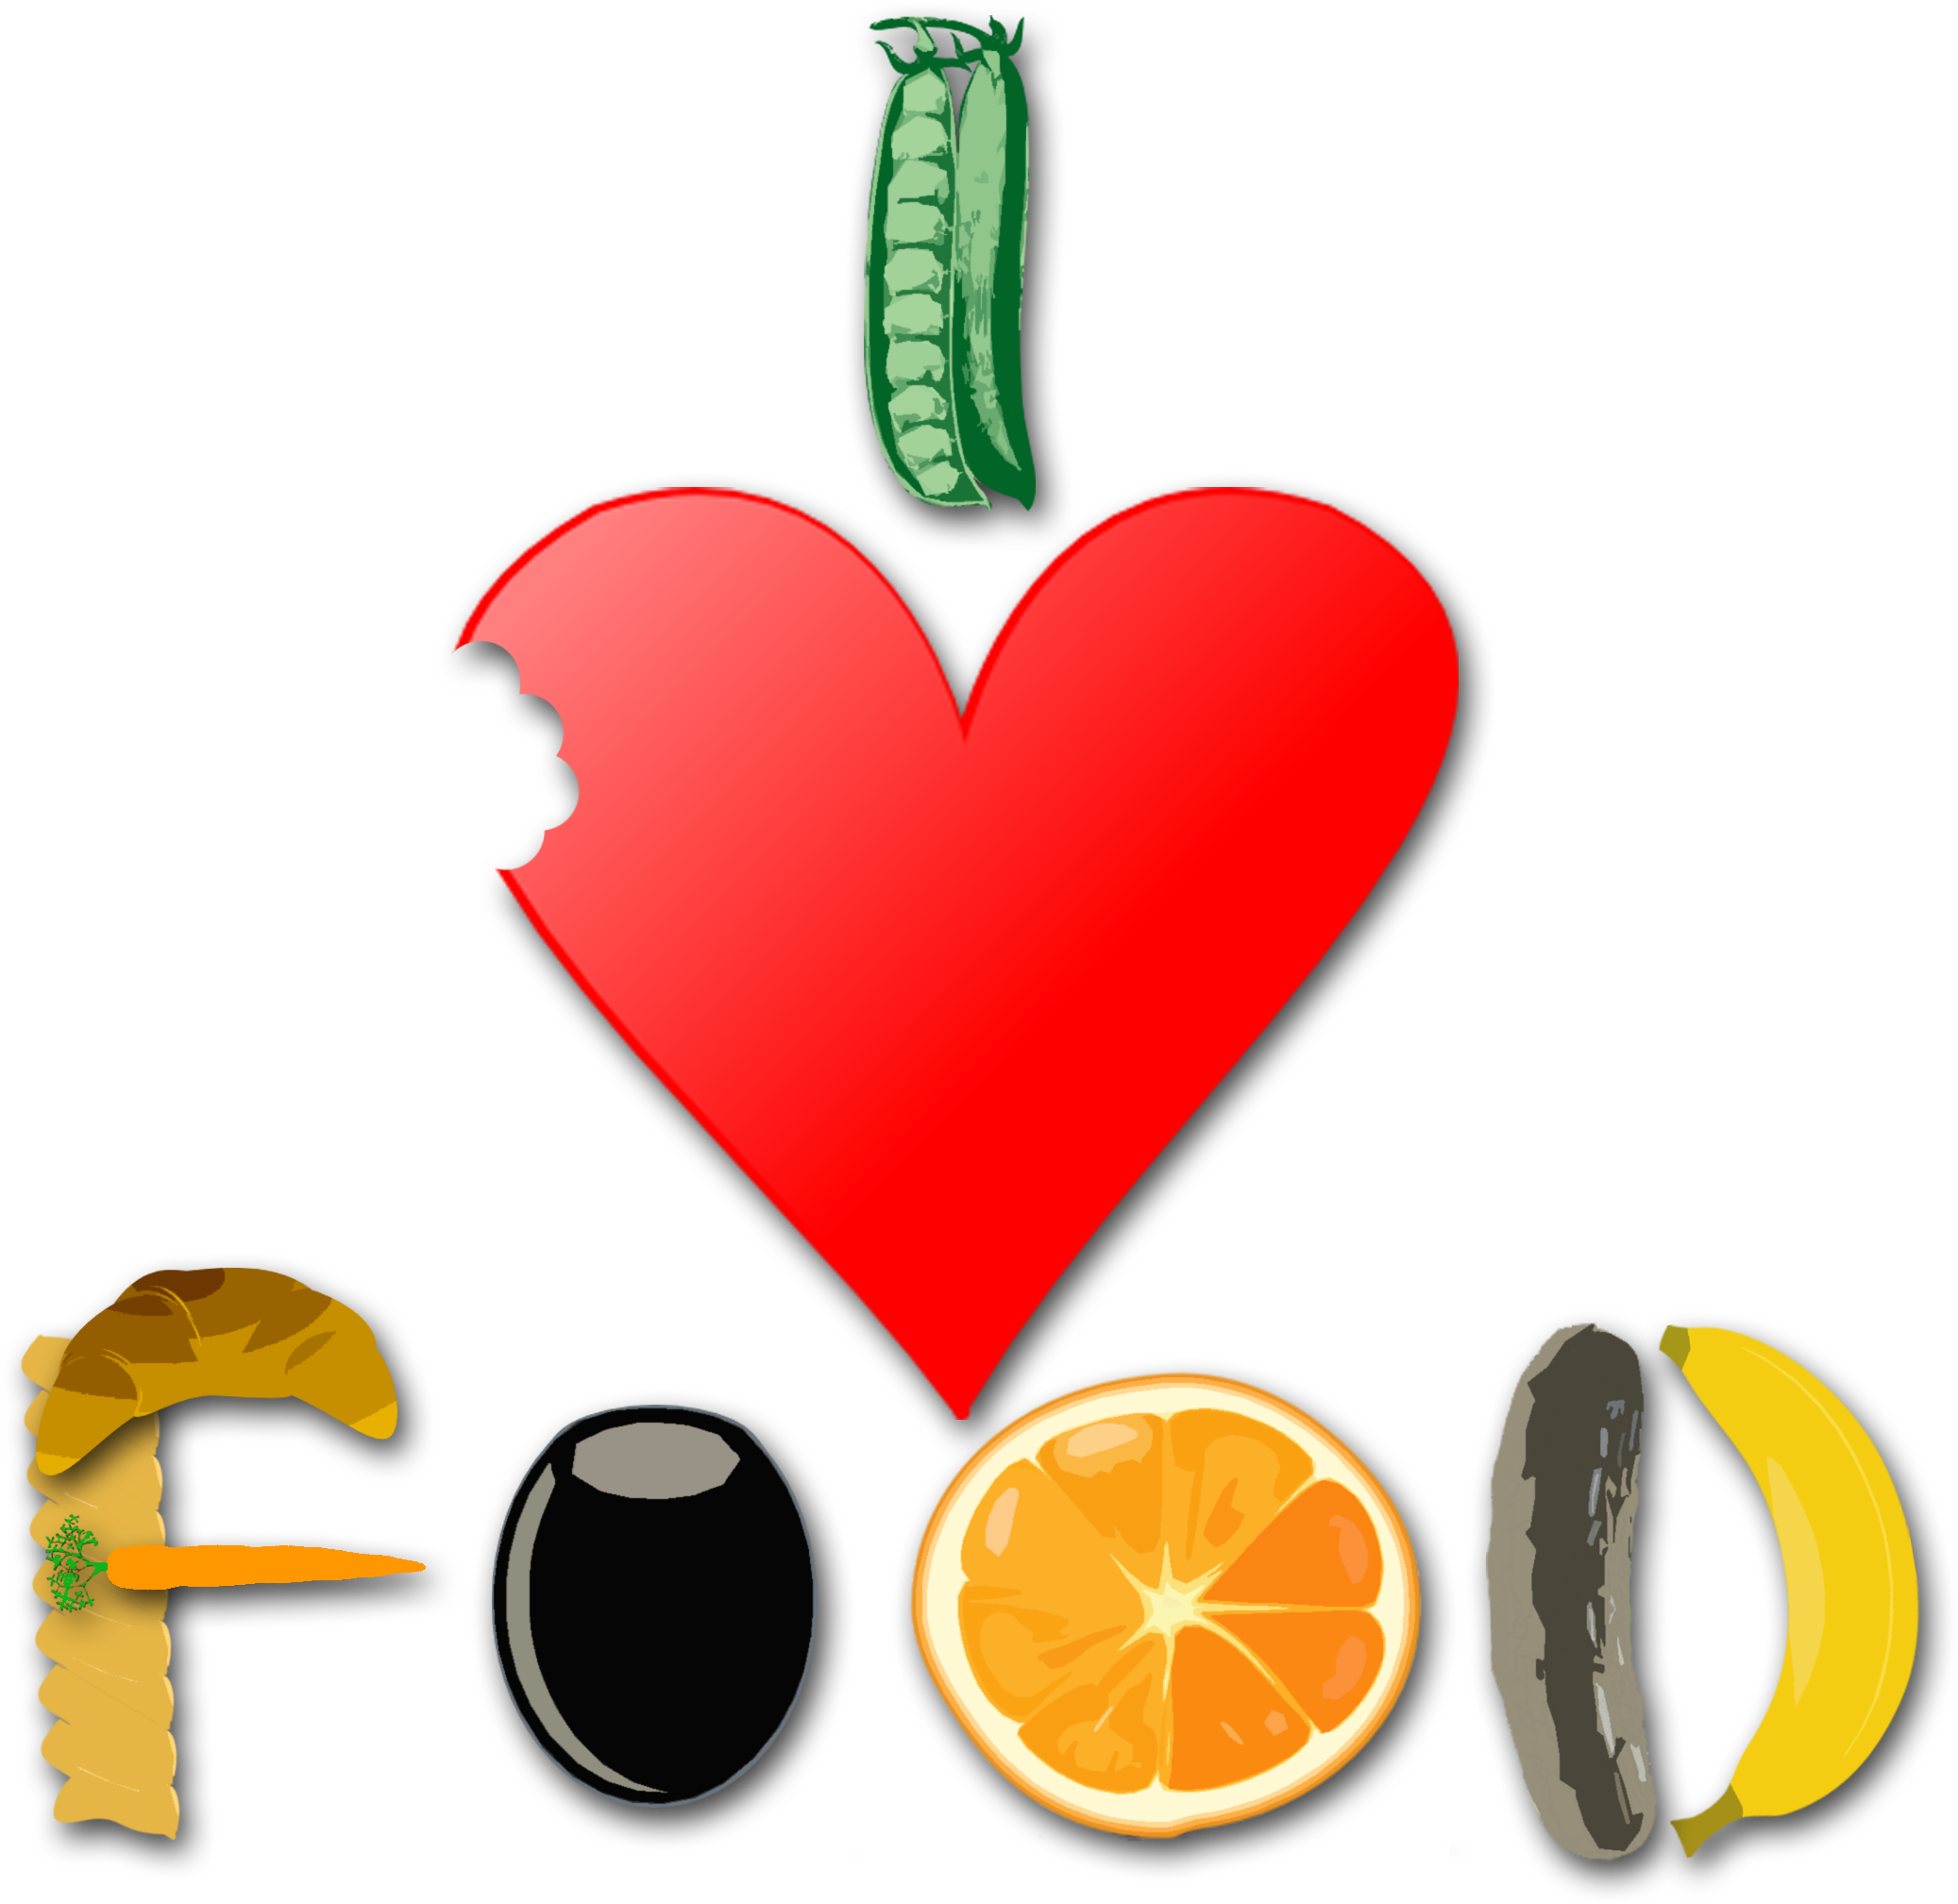 Feathers For Your Journey - Love Food (2500x2500)